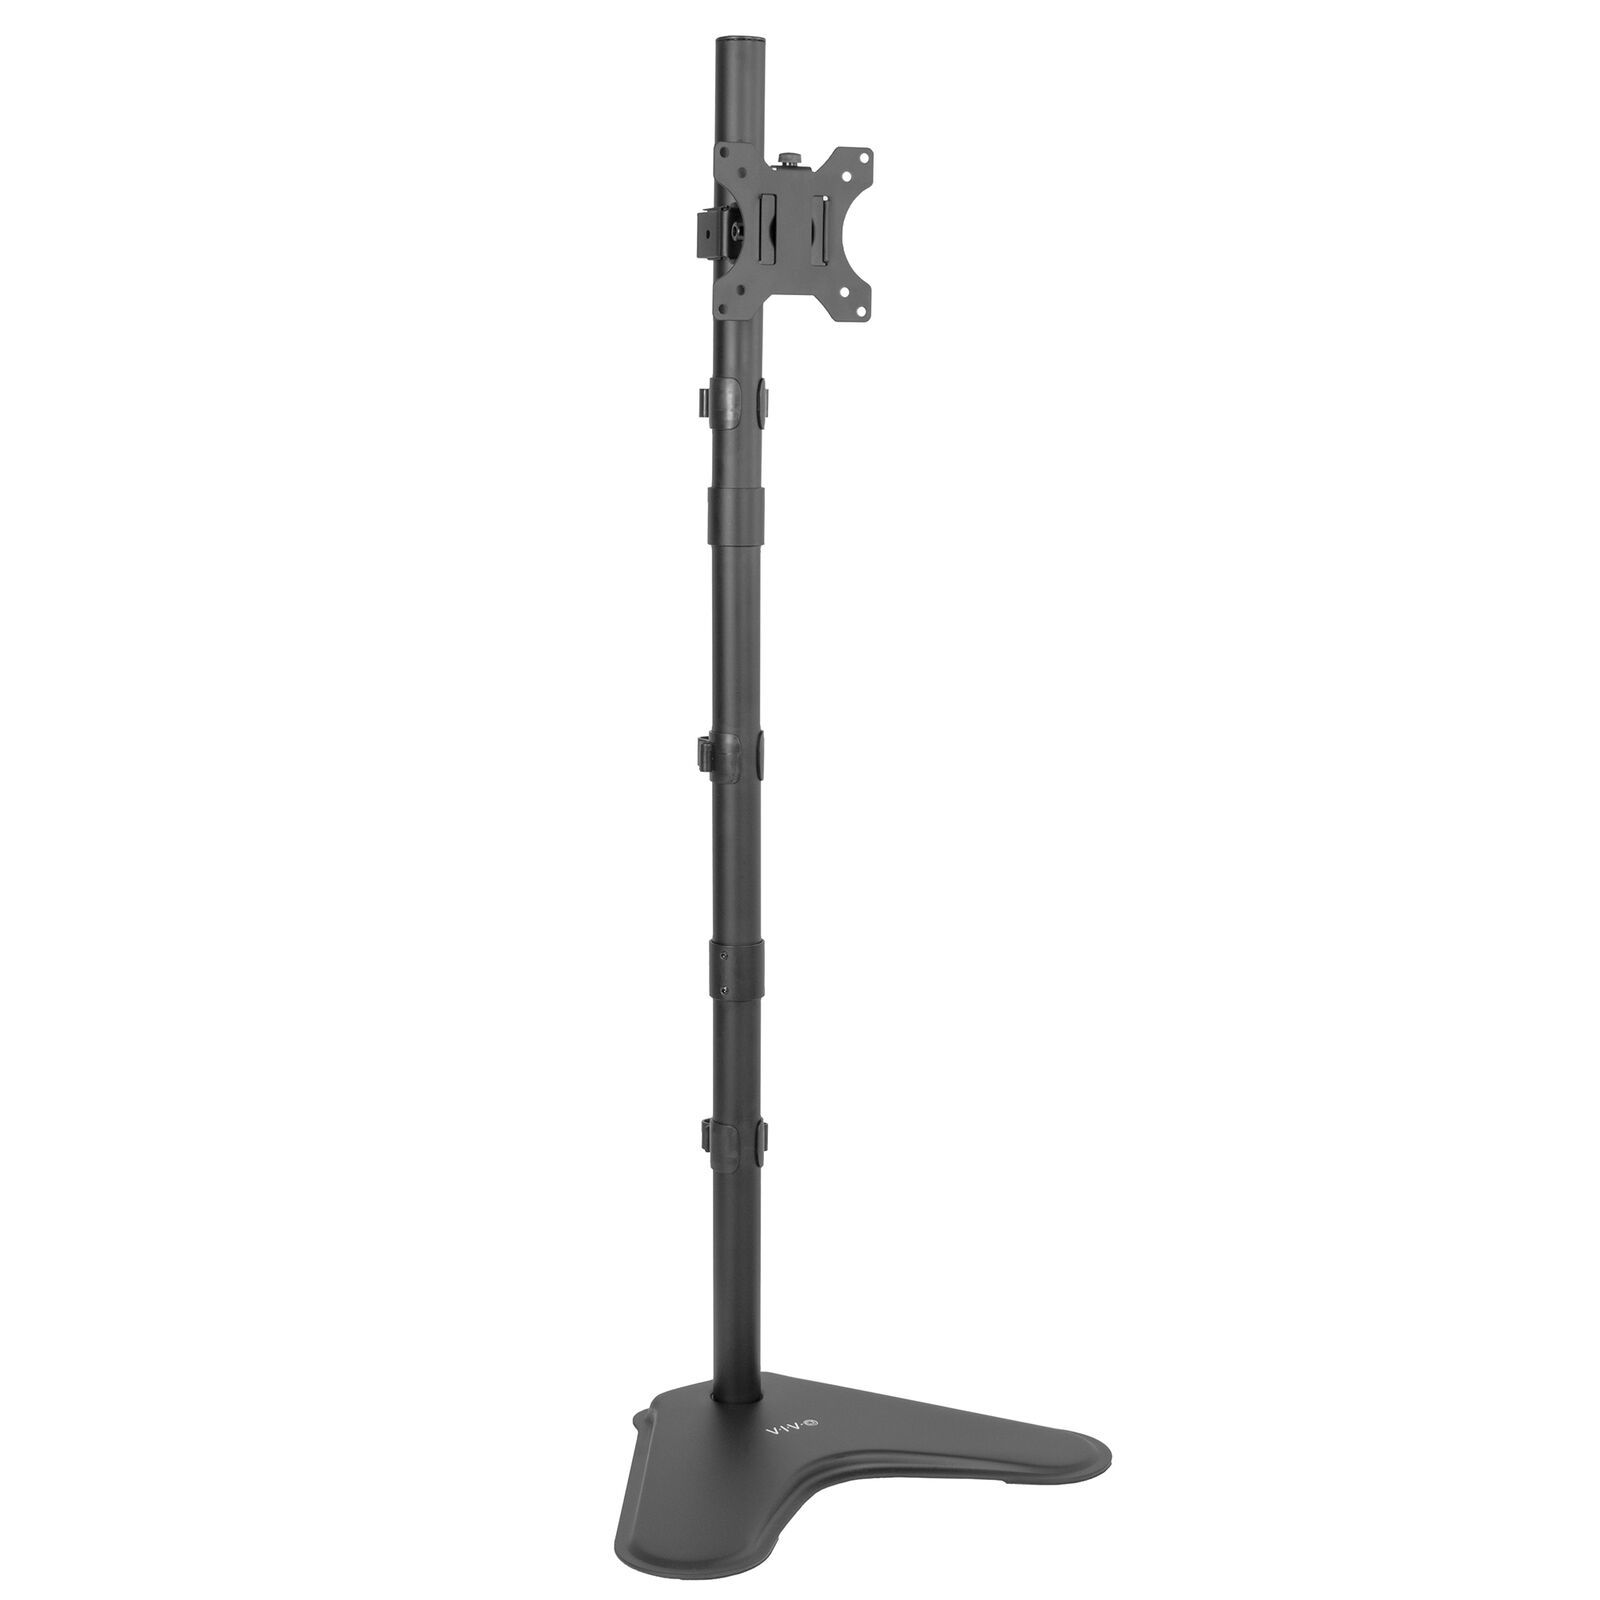 Primary image for Vivo E Tall Single Monitor Adjustable Desk Stand For 1 Screen 13" To 27"